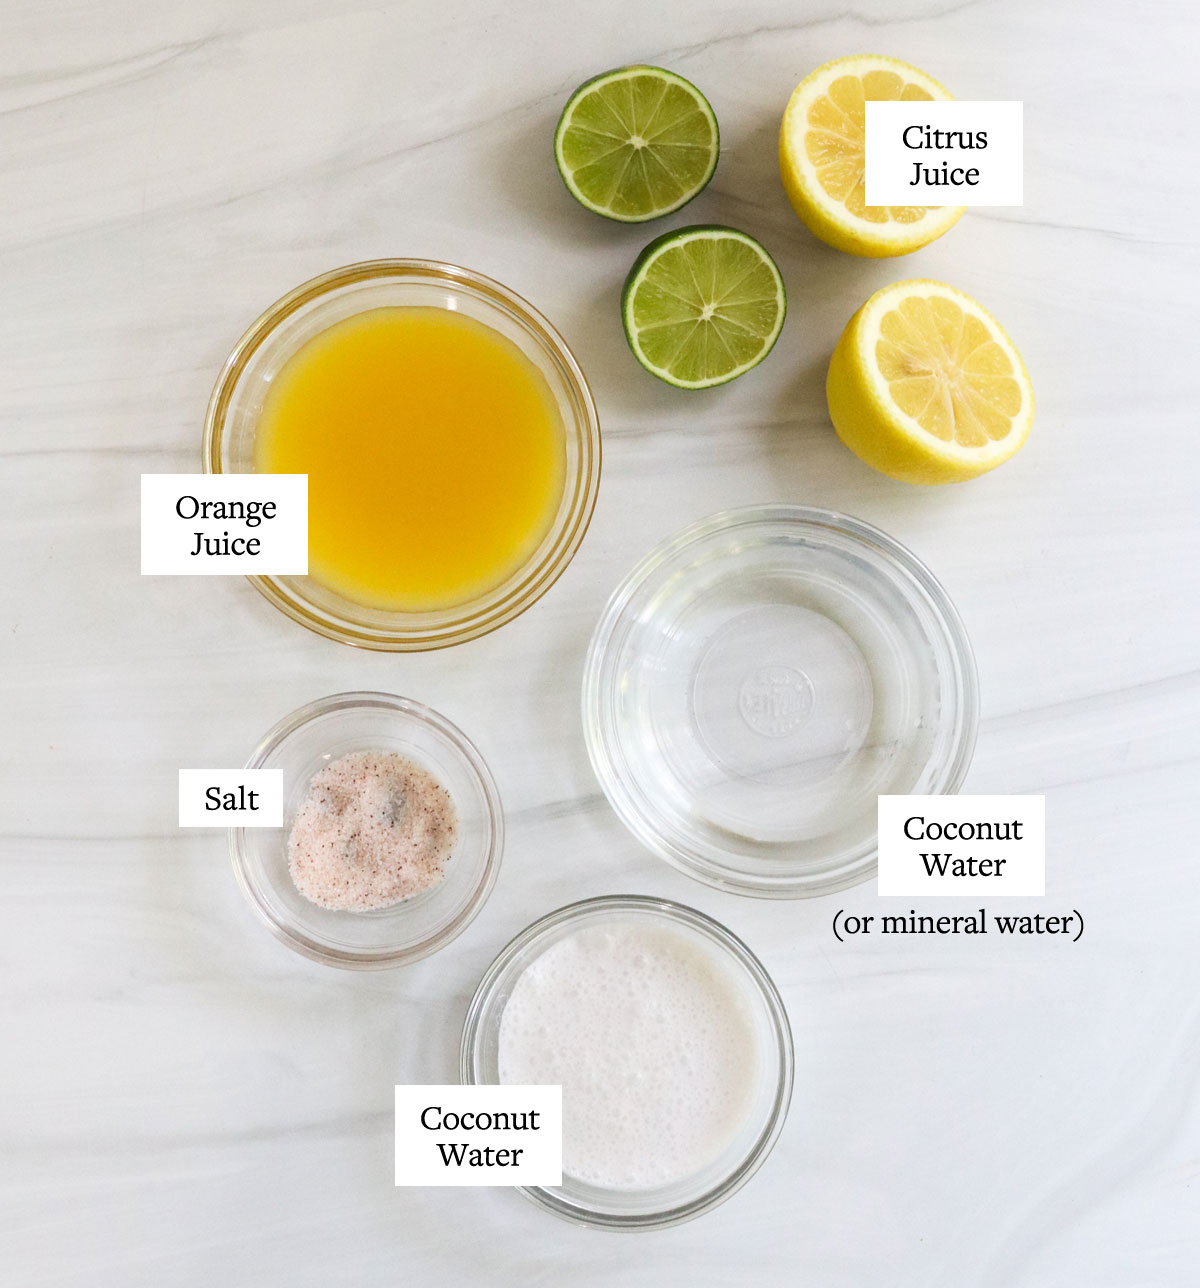 adrenal cocktail ingredients labeled in glass bowls.